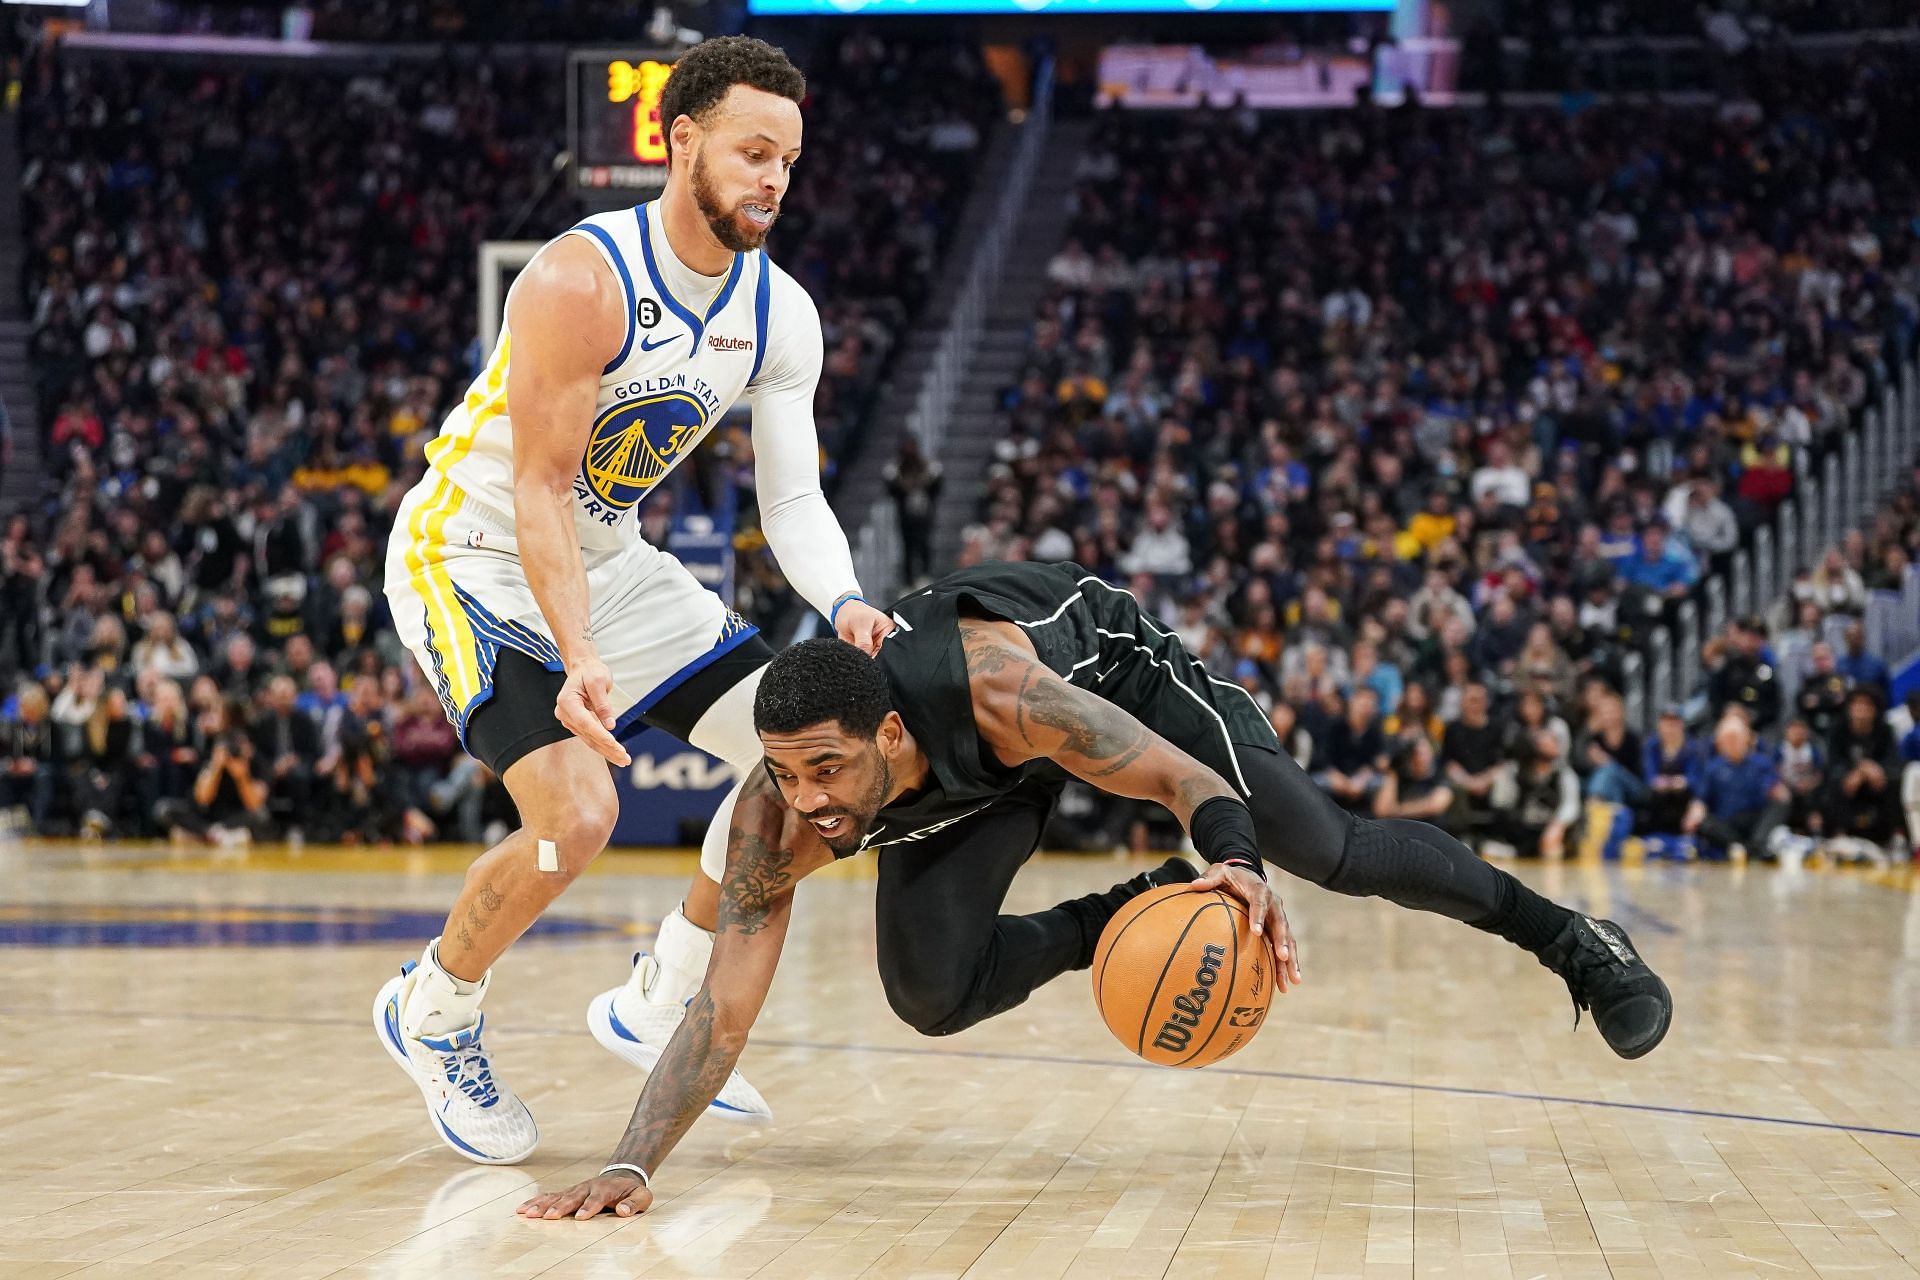 Kyrie Irving of the Brooklyn Nets against Steph Curry of the Golden State Warriors